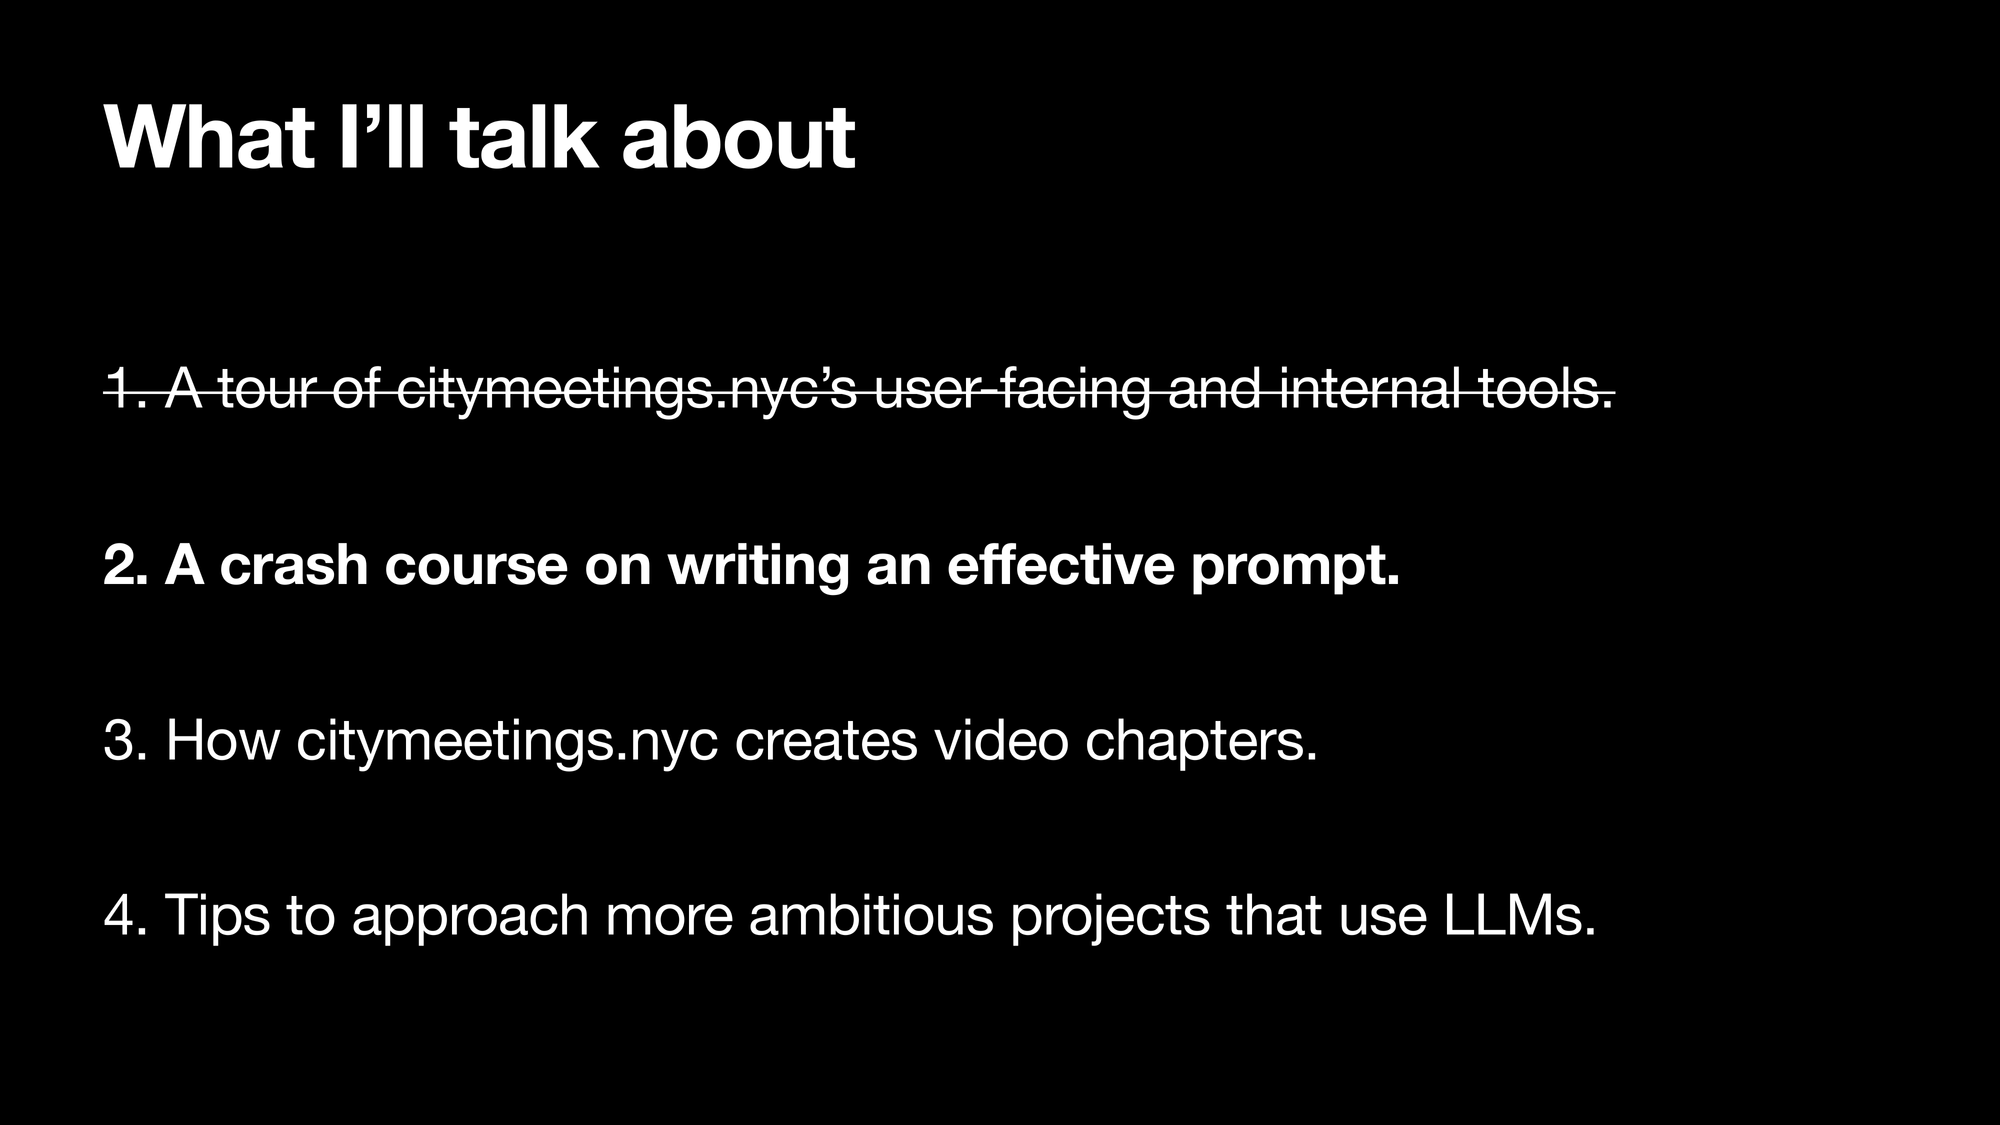 What I’ll talk about. 1. A tour of citymeetings.nycs user-facing and internal tools. 2. A crash course on writing an effective prompt. 3. How citymeetings.nyc creates video chapters. 4. Tips to approach more ambitious projects that use LLMSs. Section 1 is striked-out, section 2 is highlighted.
